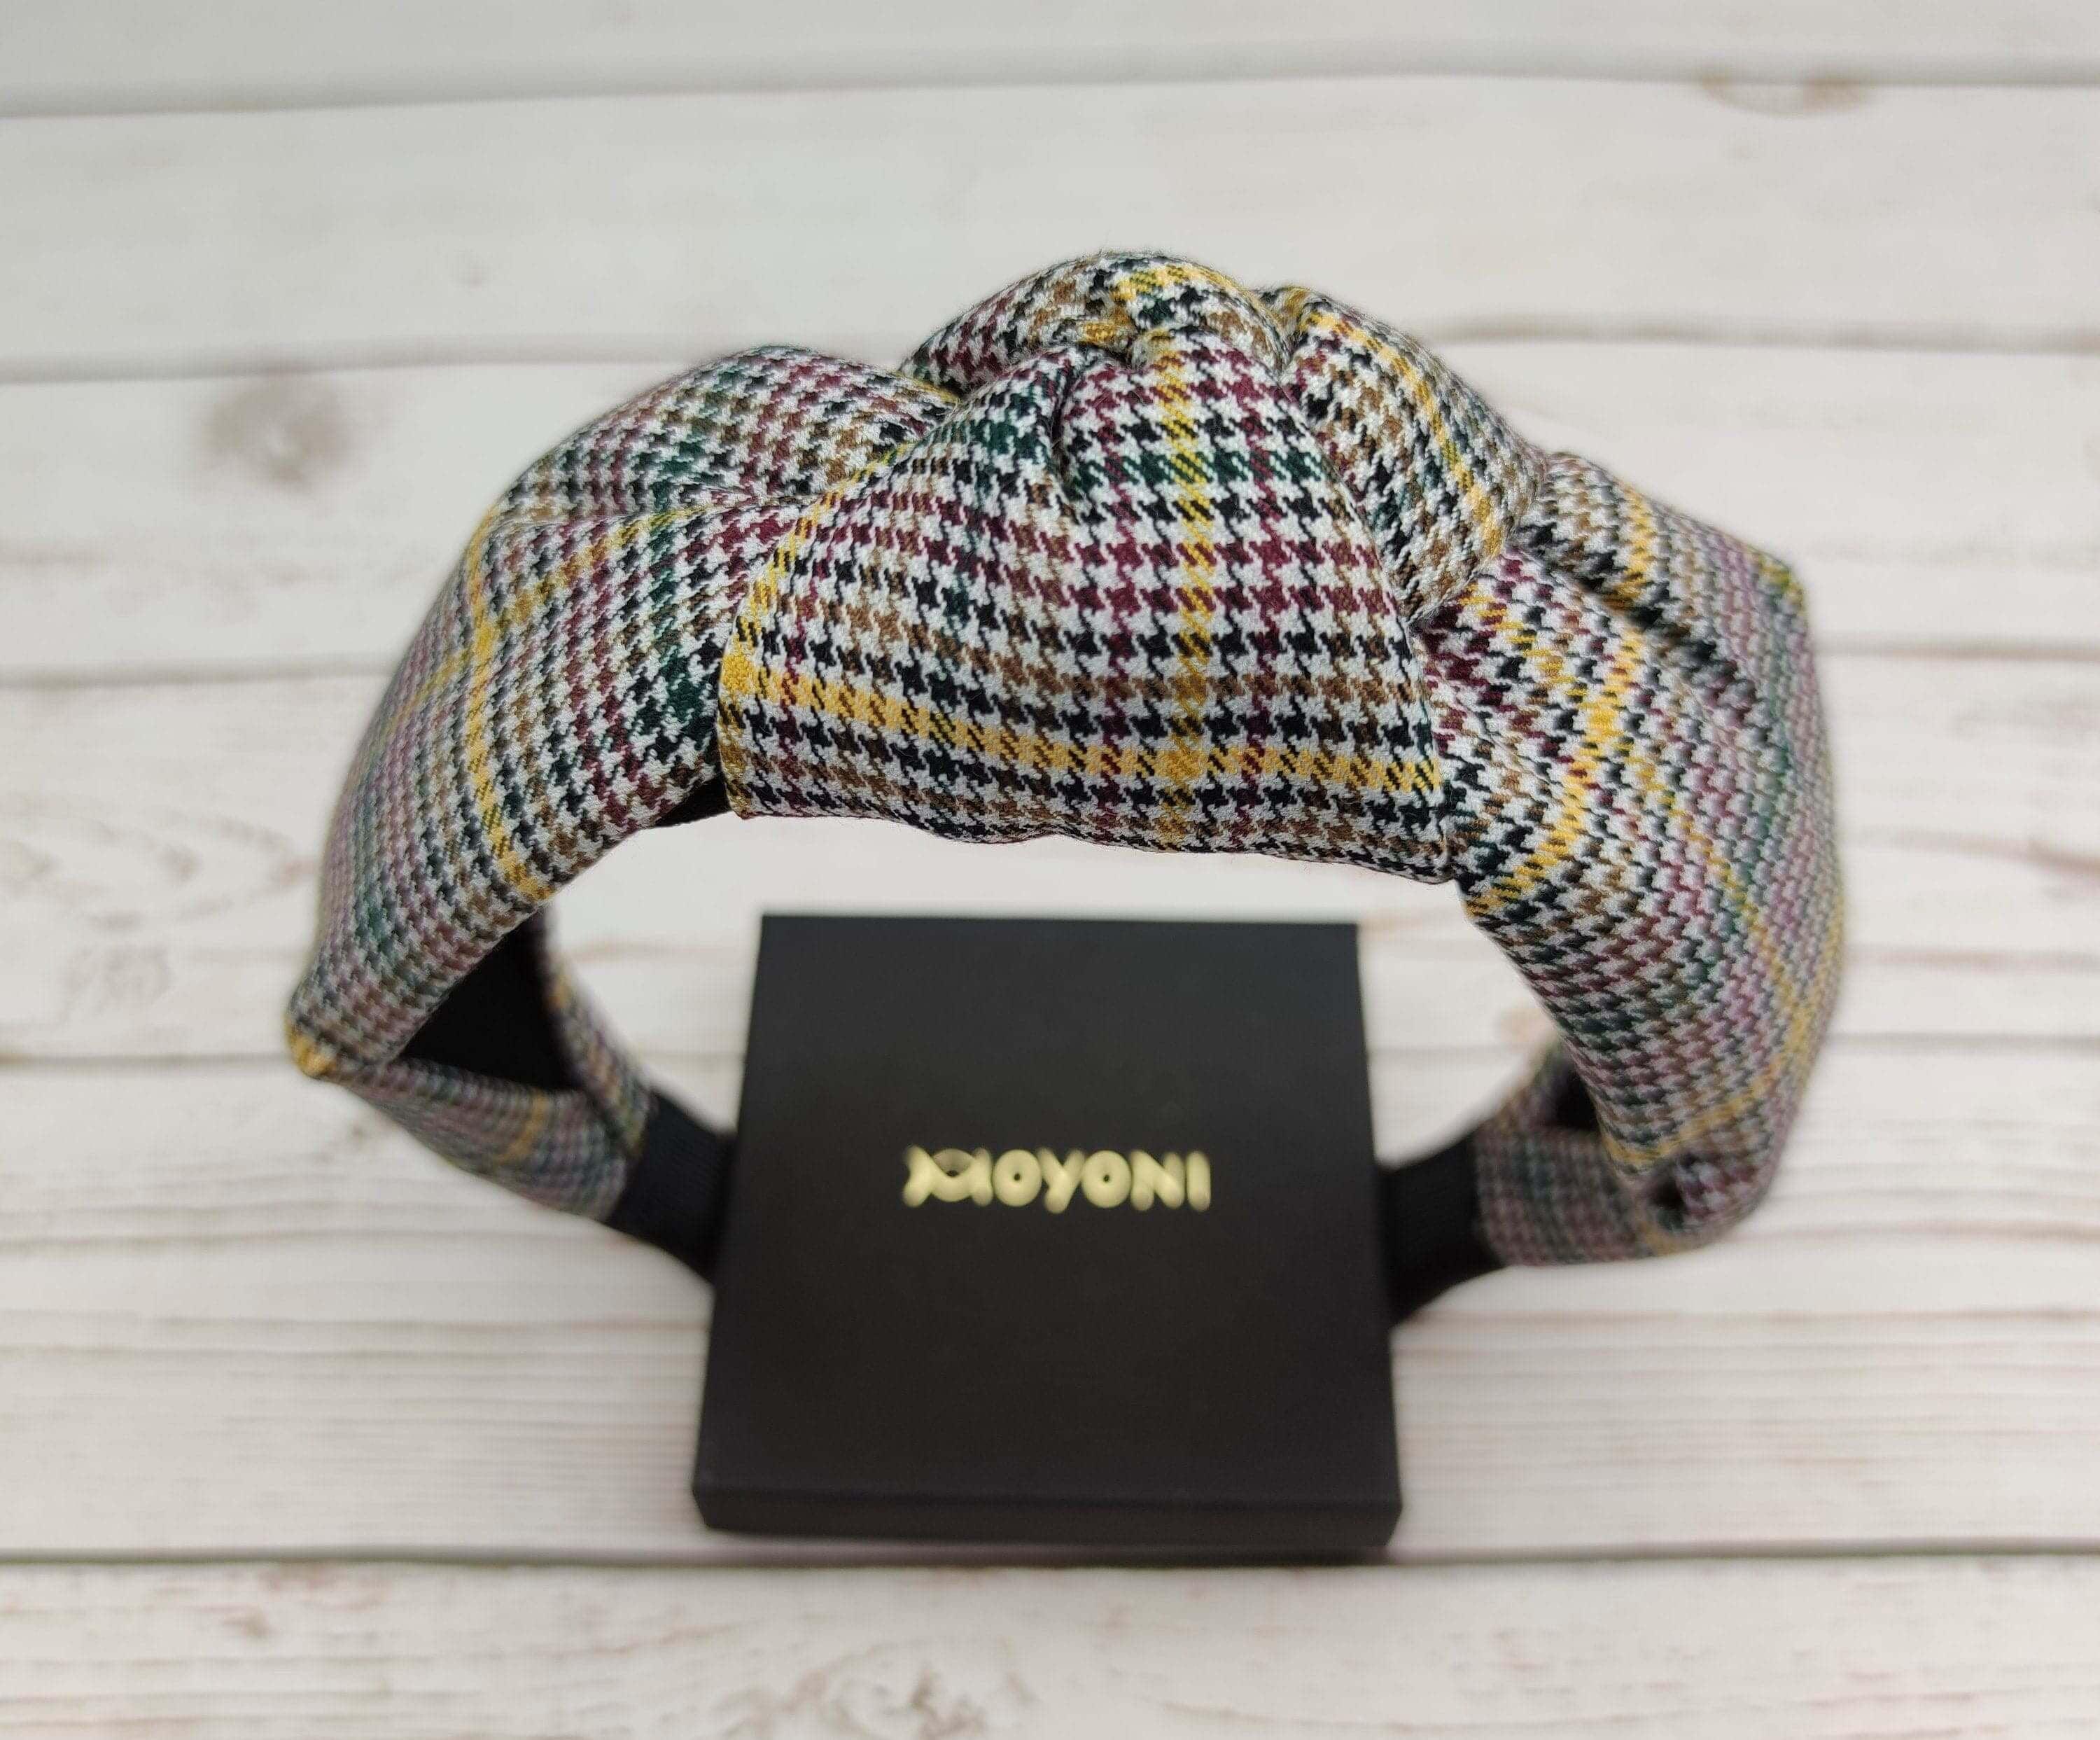 Delicate White and Black Crepe Knotted Headband - Classic, Fashionable Houndstooth Hair Accessory for College with Yellow, Green and Brown Stripes available at Moyoni Design